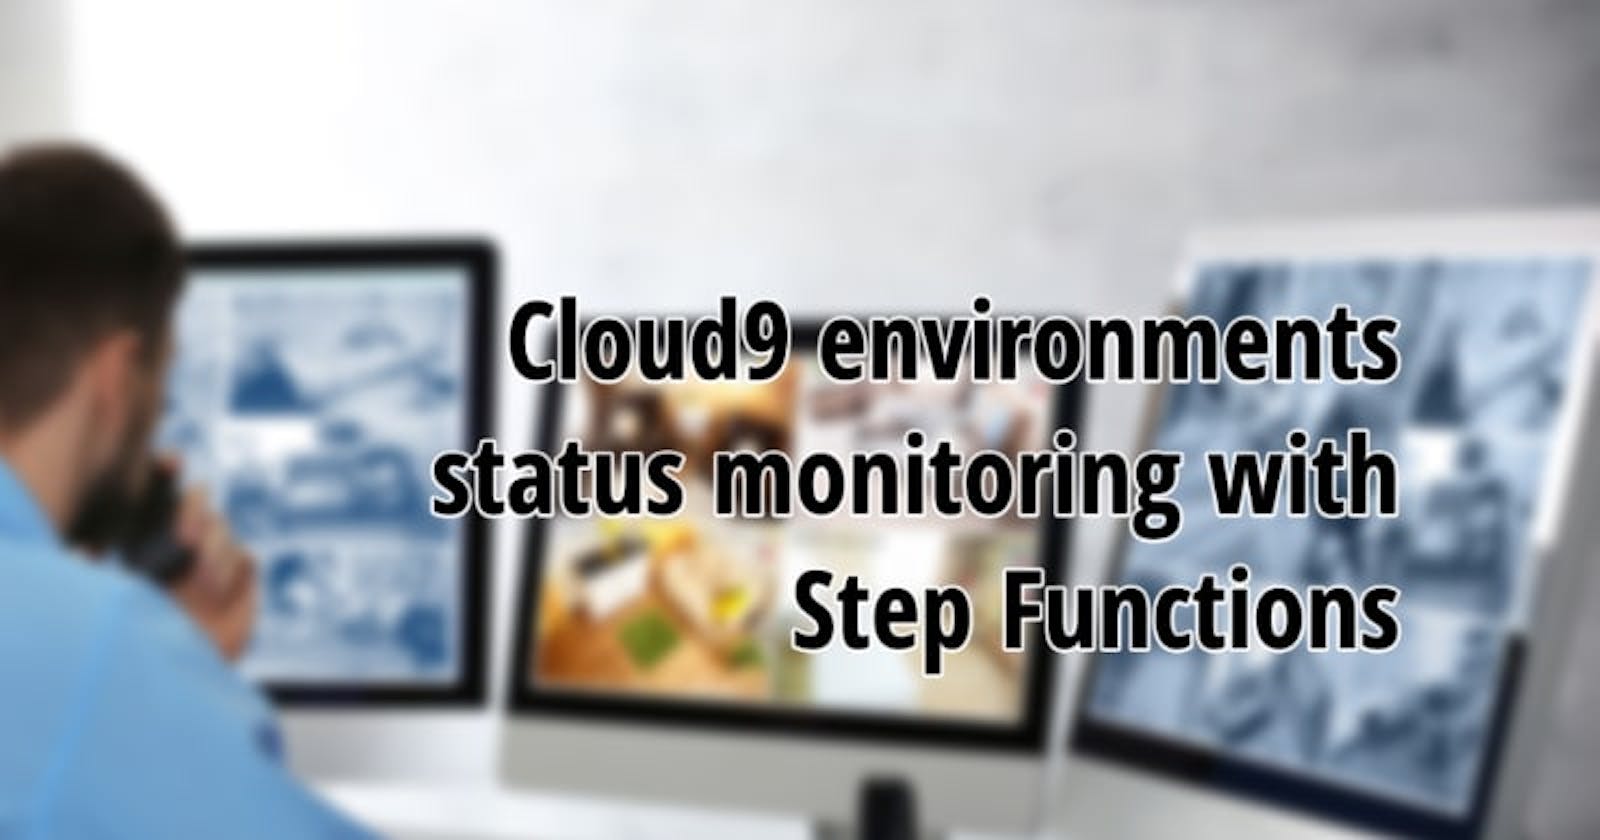 Cloud9 environments status monitoring with Step Functions